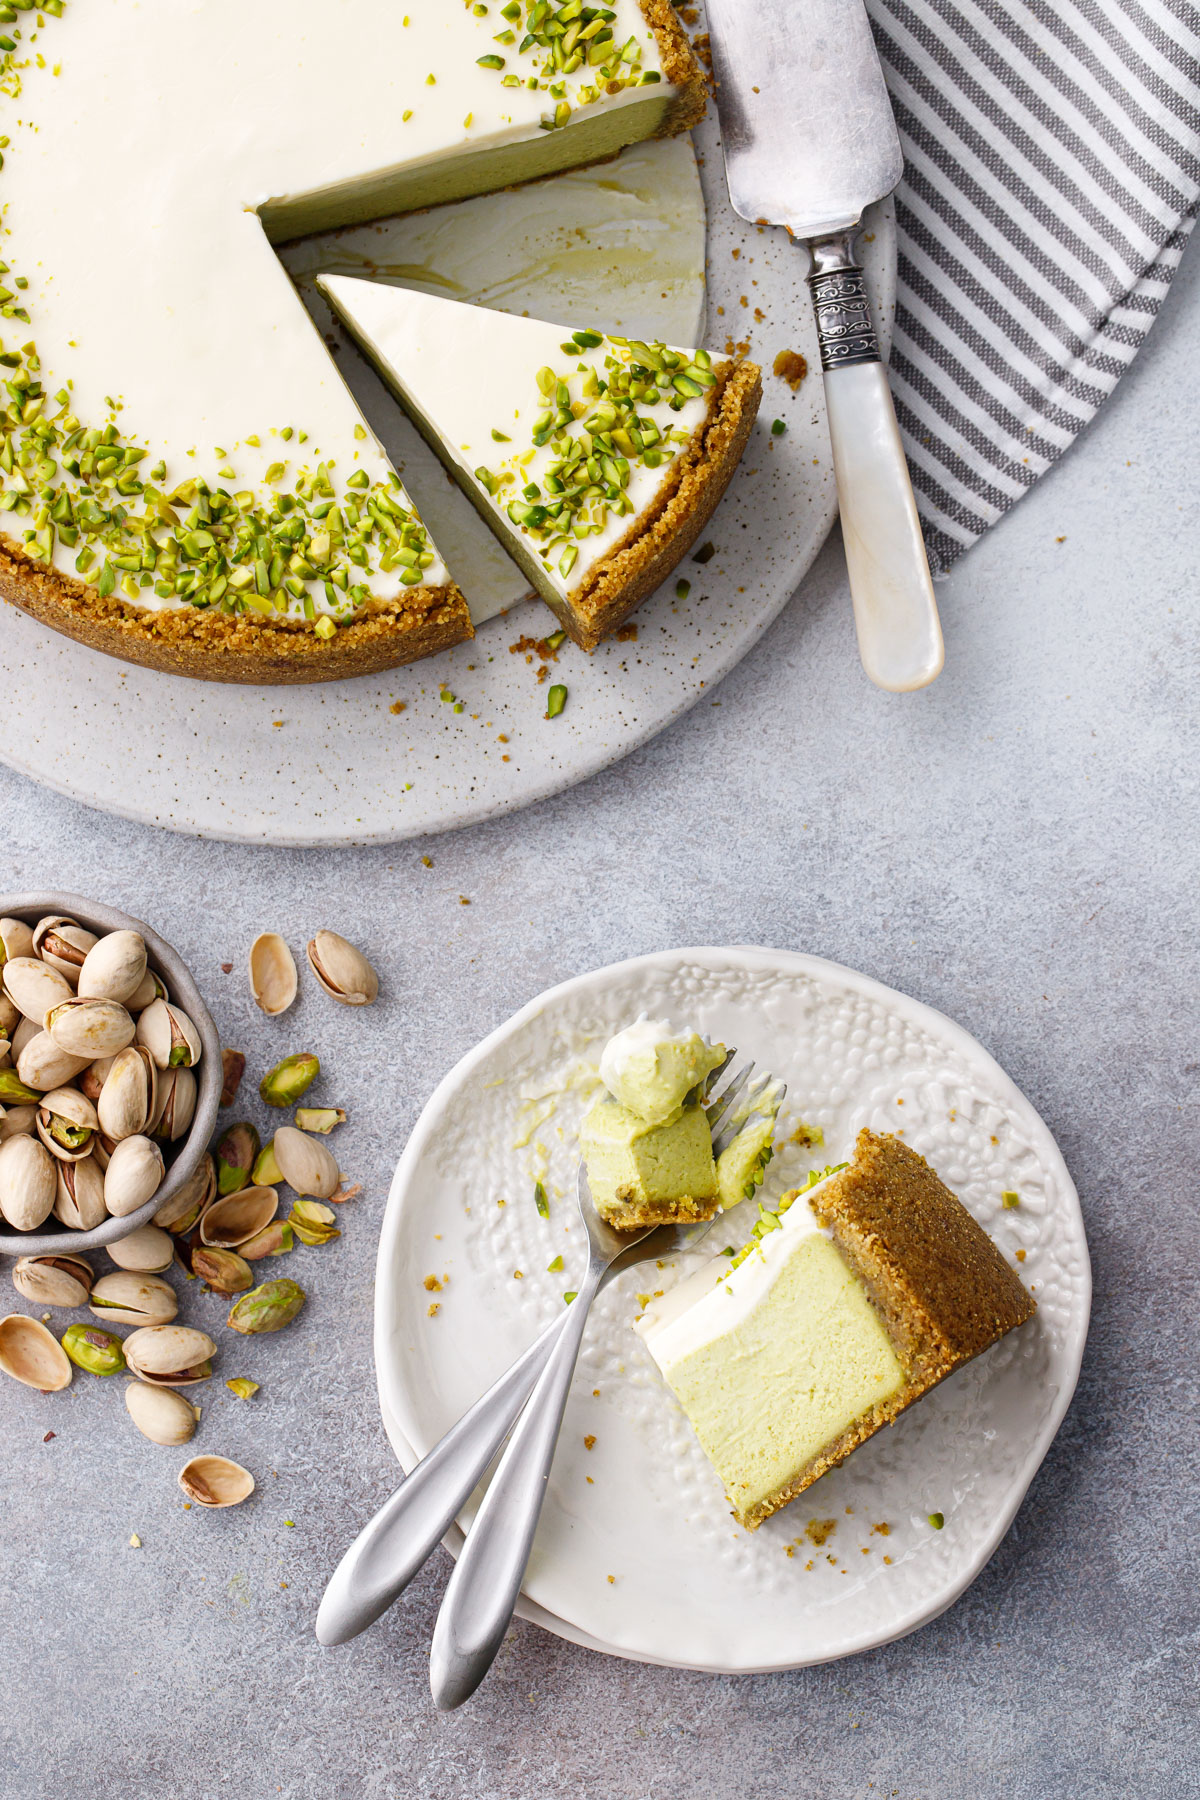 Overhead, slice of Pistachio Sour Cream Cheesecake on its side on a white plate with a forkful on the site, with bowl of messy pistachios and cake plate with the full cheesecake.